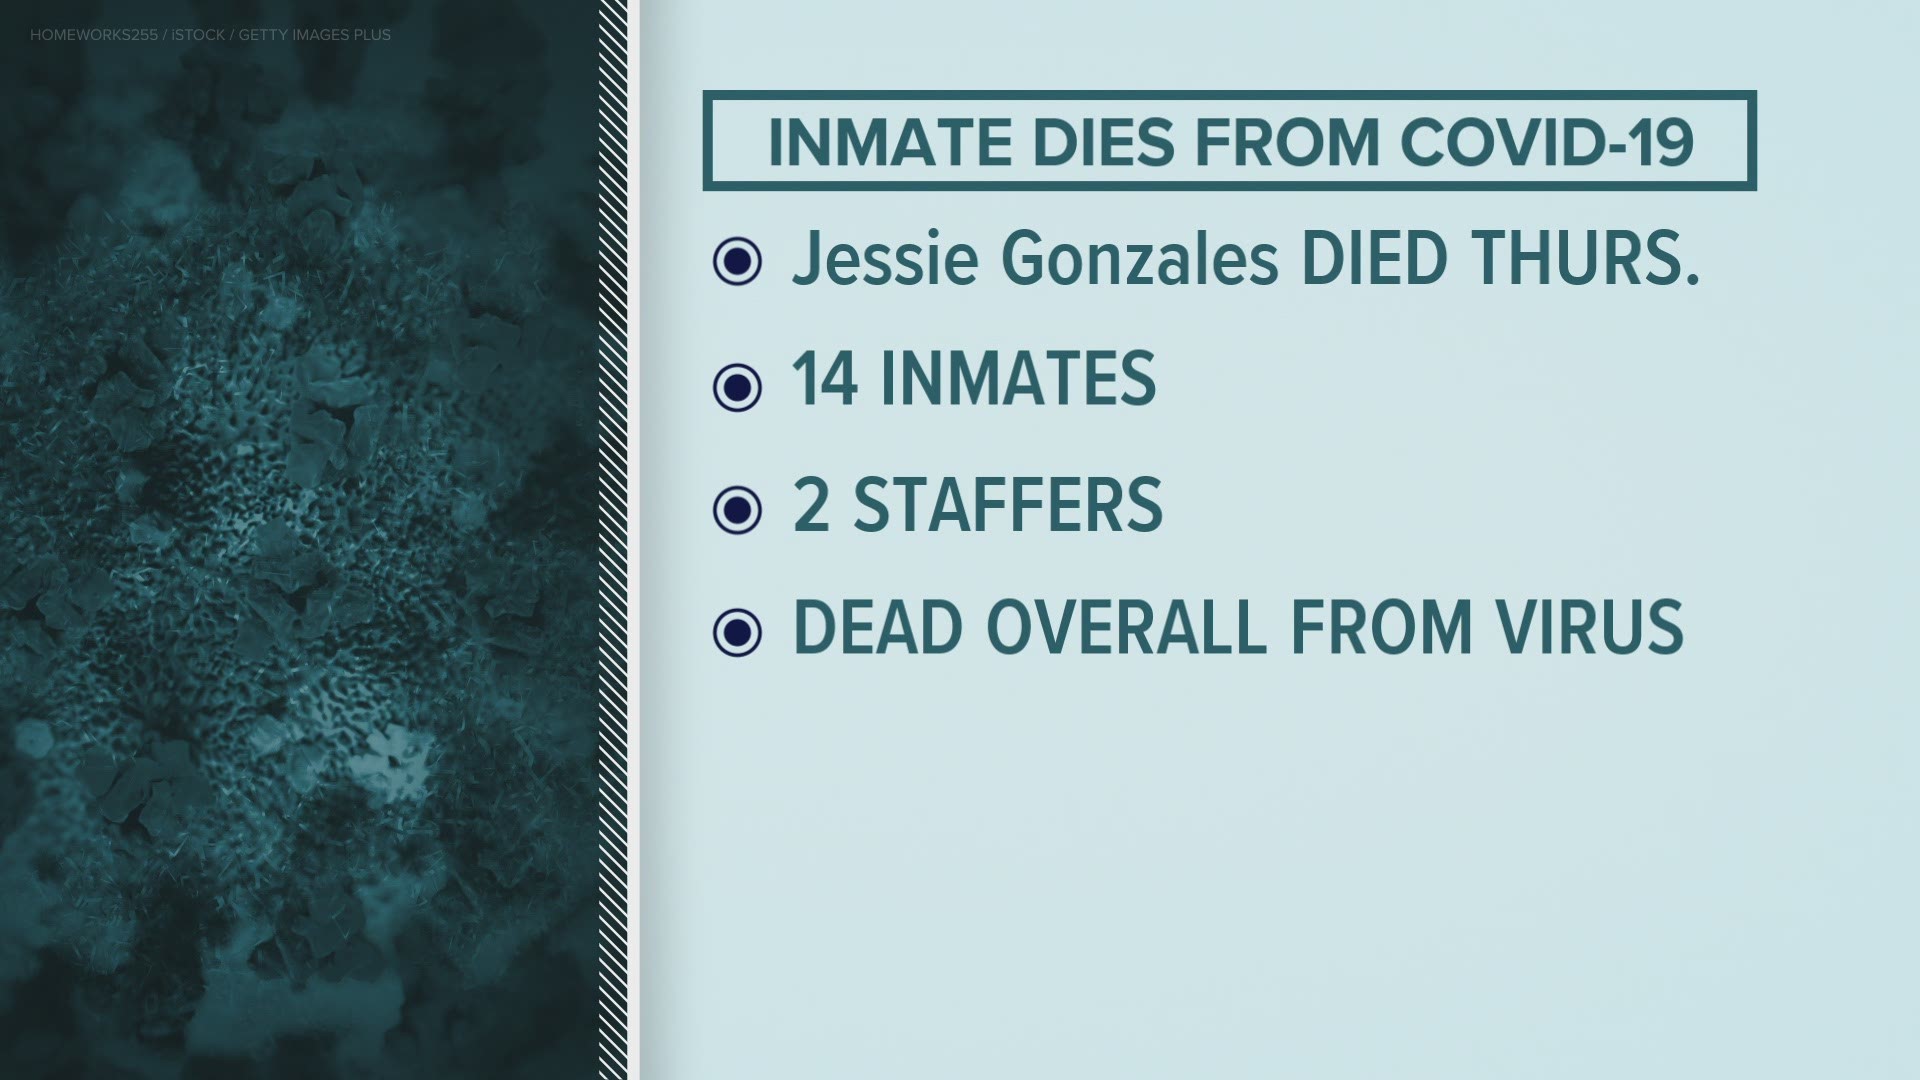 Jessie Joseph Gonzales, 67, was pronounced dead at 4:55 p.m. on Jan. 7 at the University of Iowa Hospitals and Clinics.